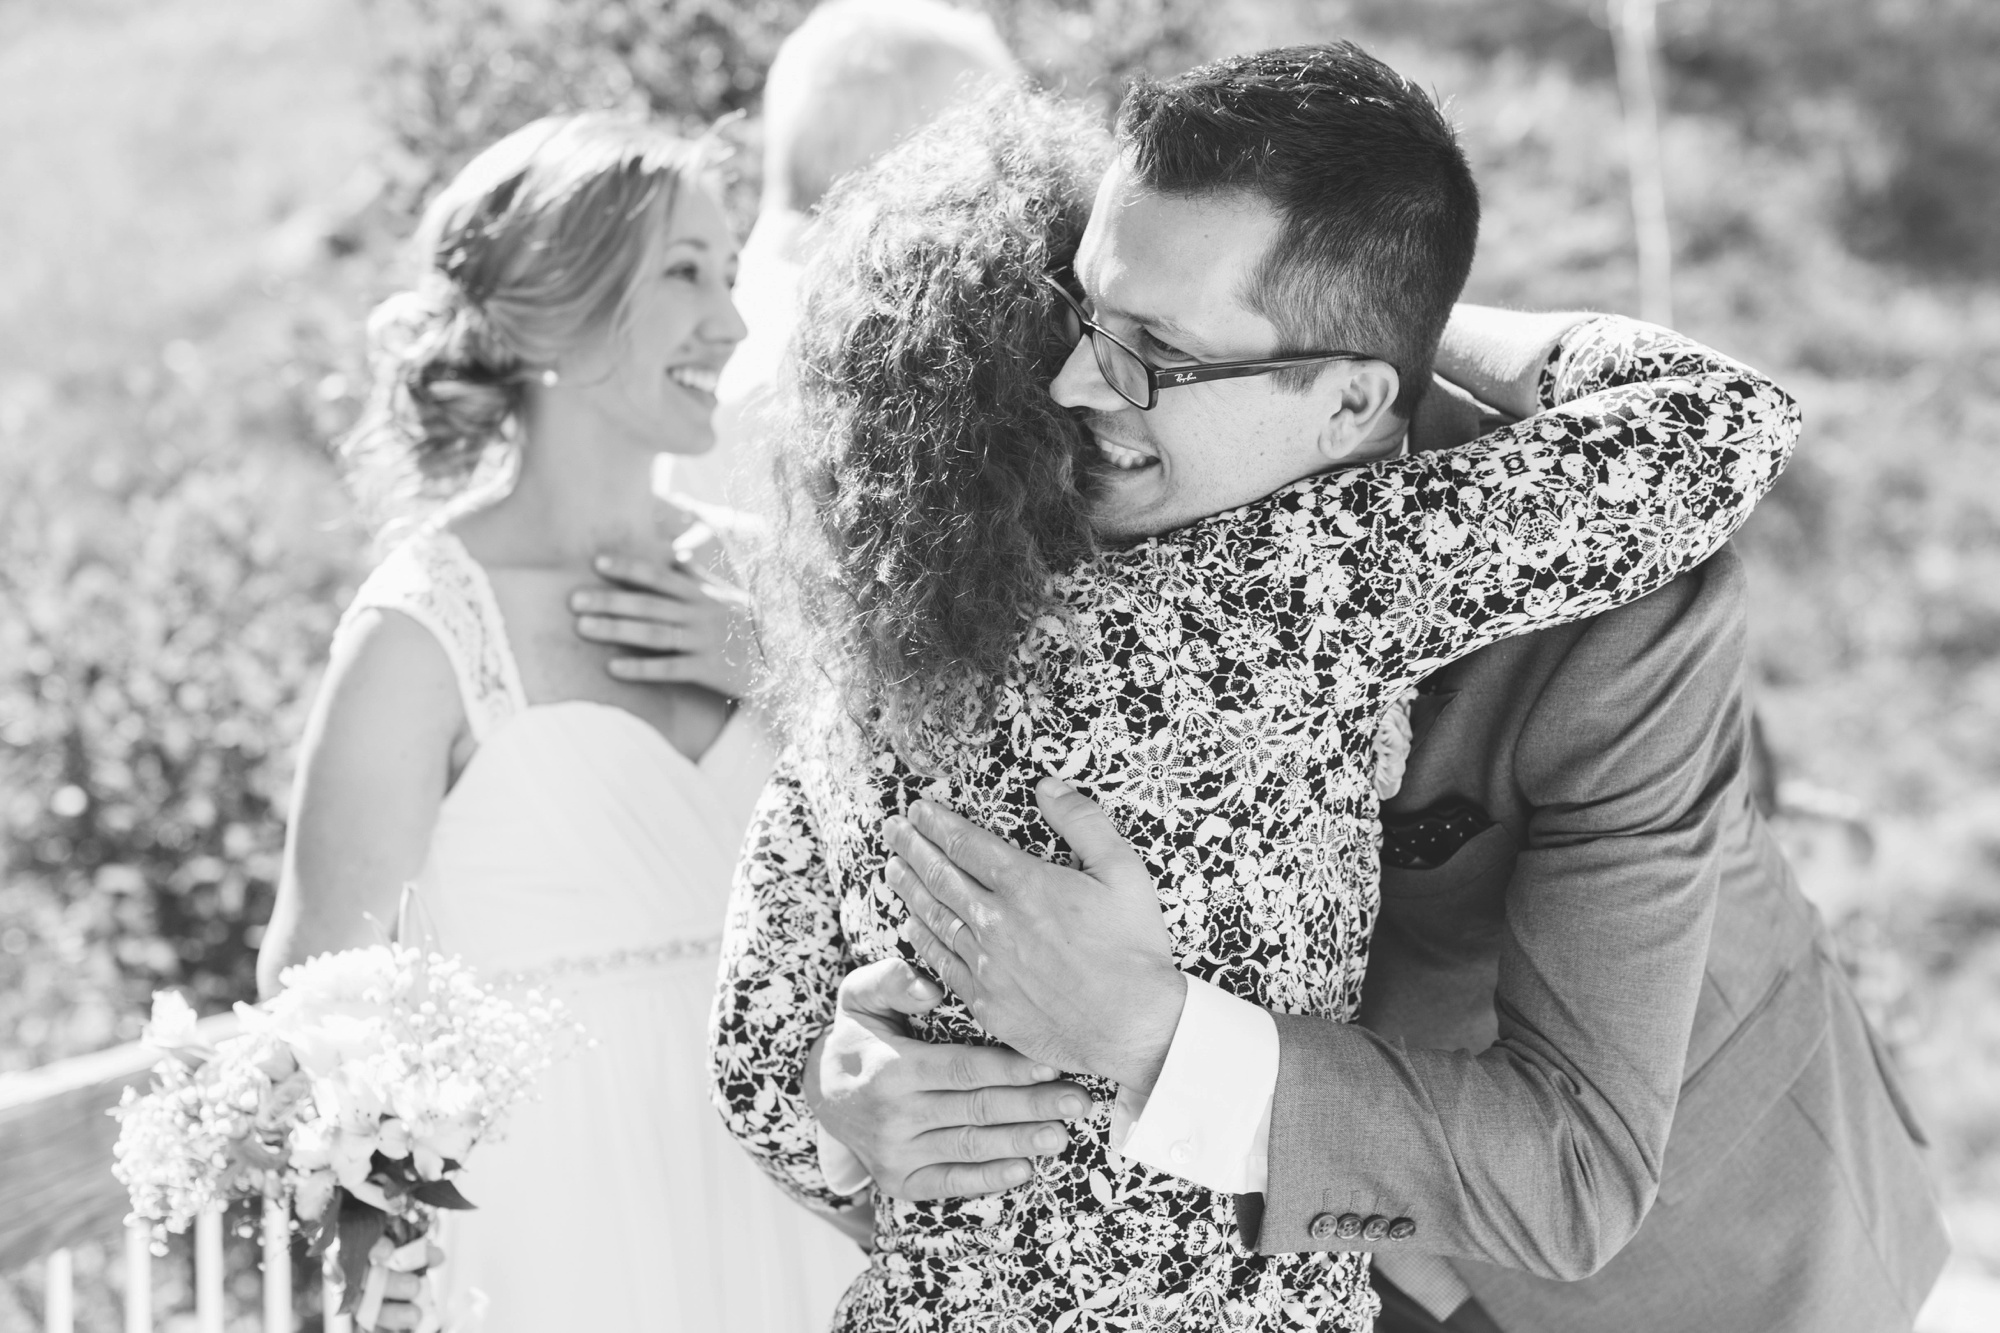 Mother of the groom hugs tight just after wedding ceremony. Love, joy, and bliss as bride and groom spend time having wedding photos taken. Photo by destination wedding photographer Rebecca Cerasani.